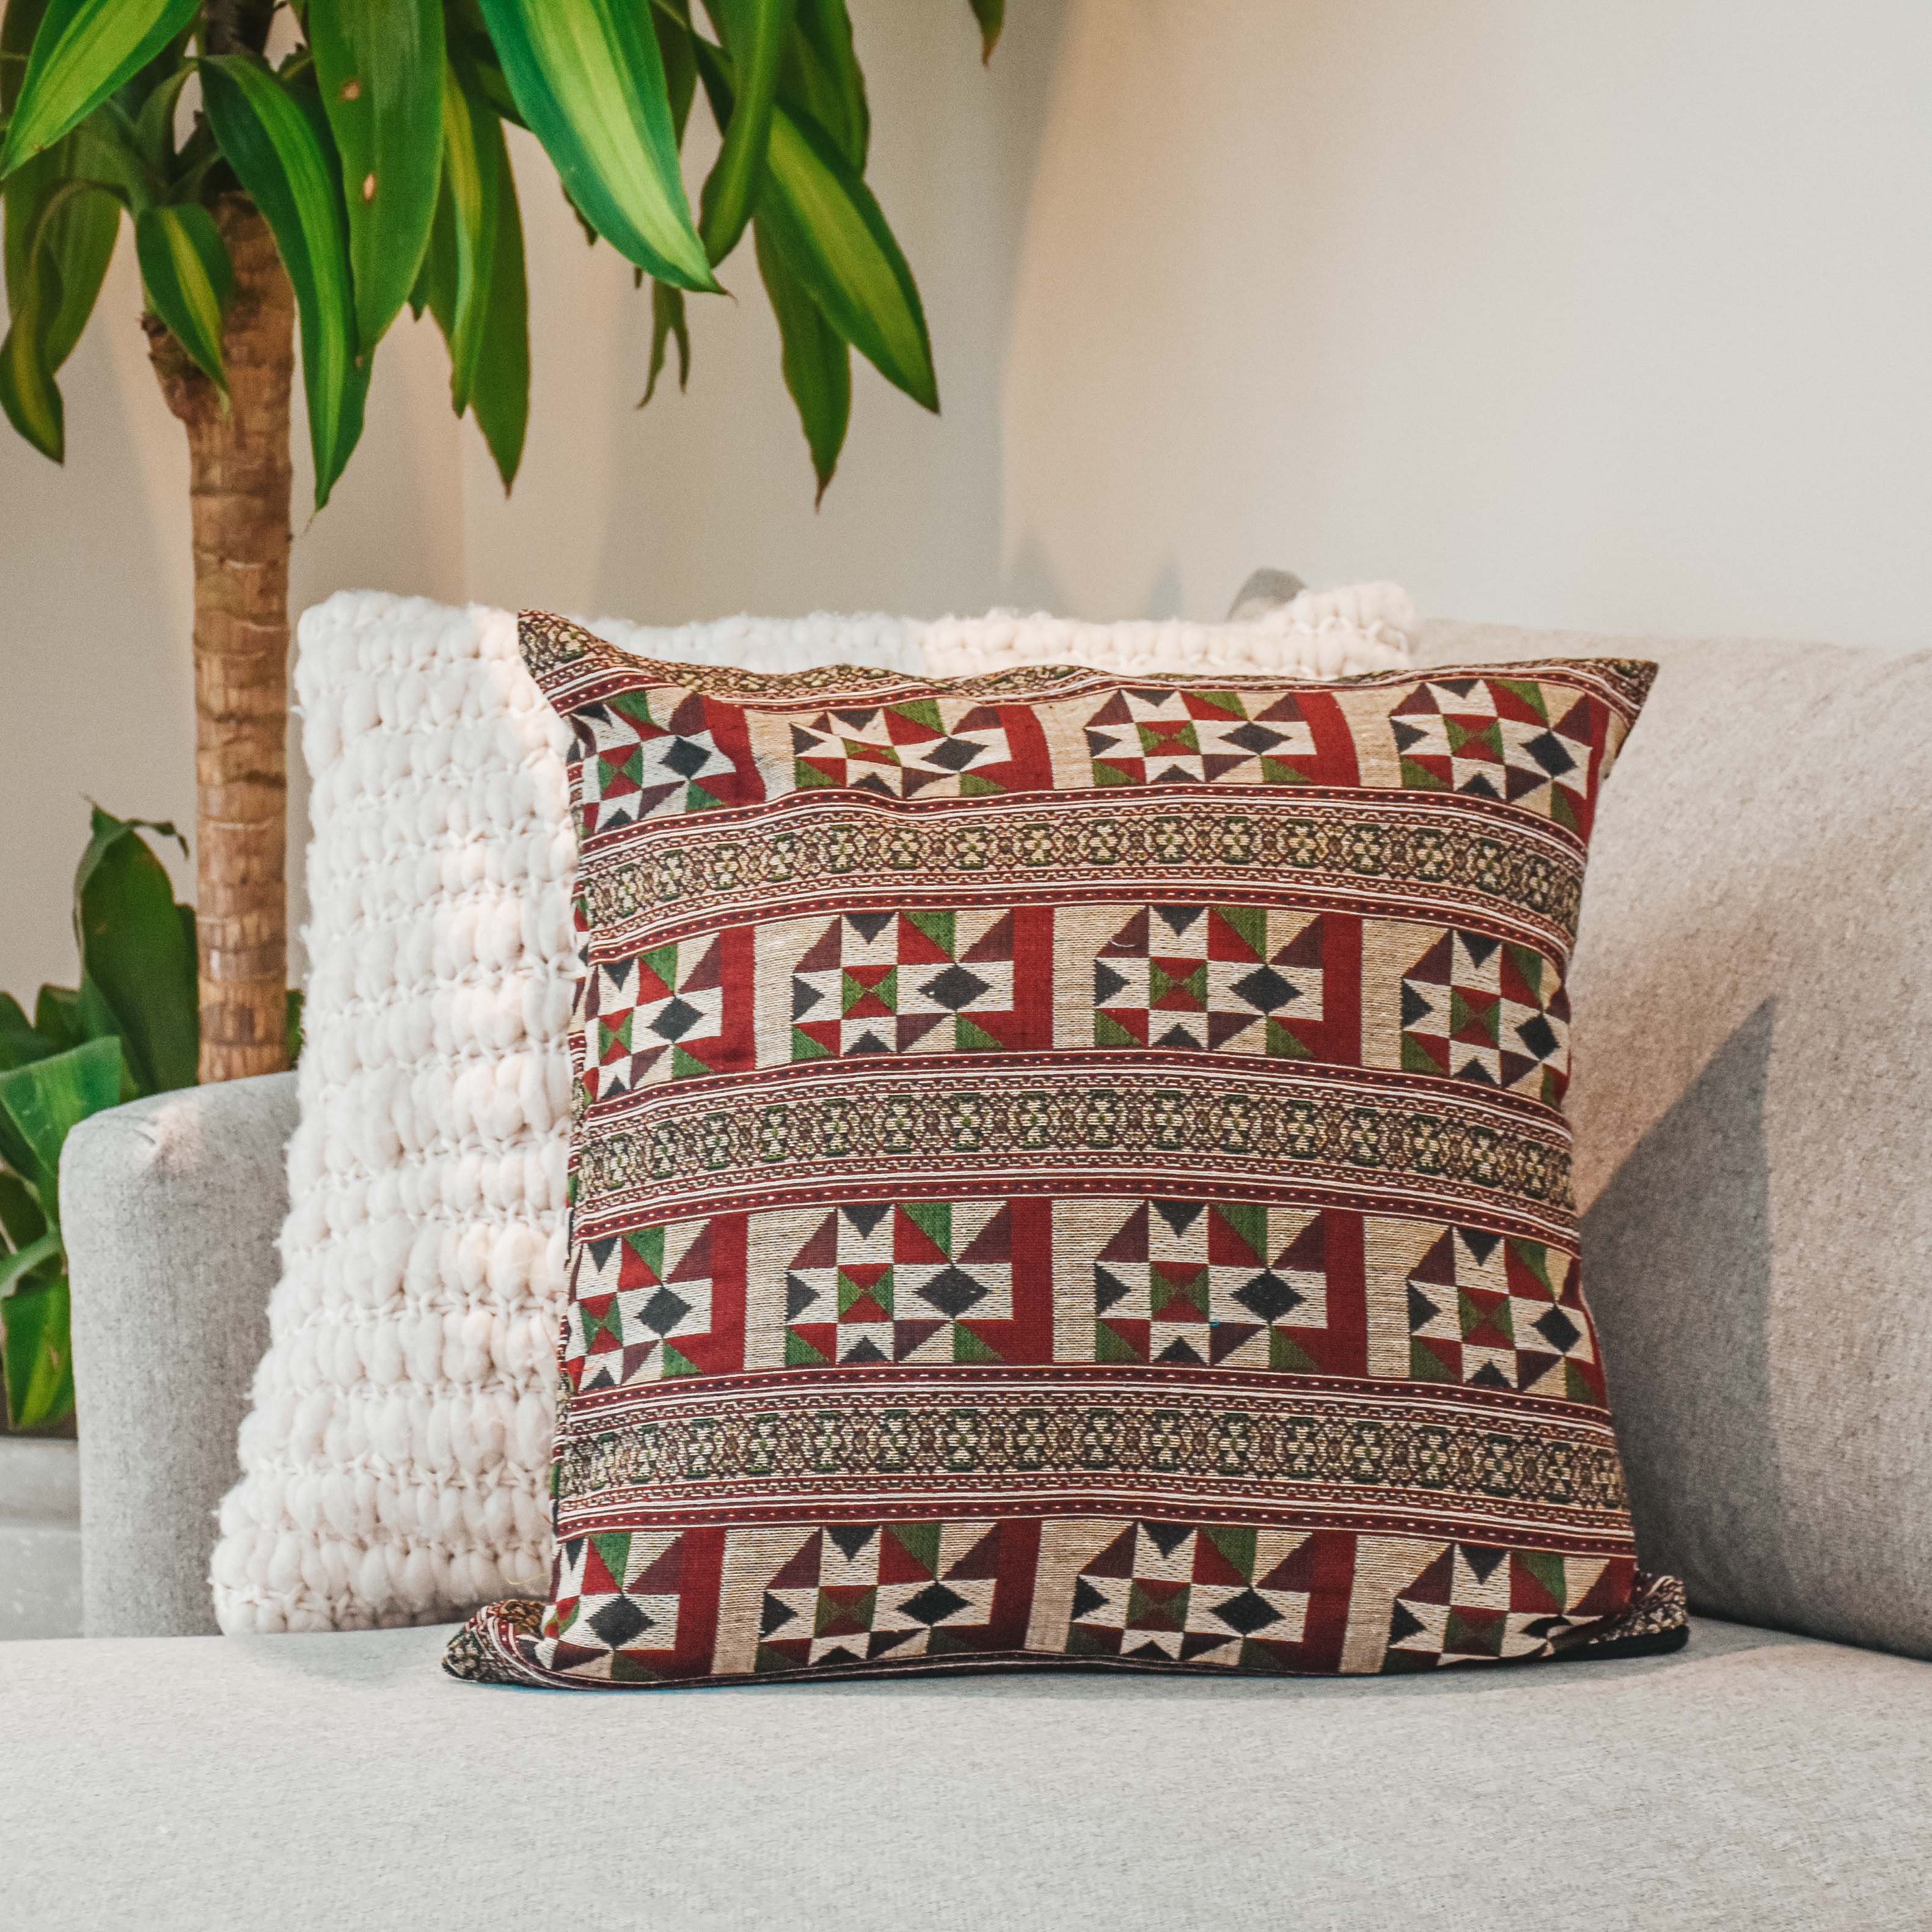 TULUM PILLOW COVER Elepanta Pillows - Buy Today Elephant Pants Jewelry And Bohemian Clothes Handmade In Thailand Help To Save The Elephants FairTrade And Vegan